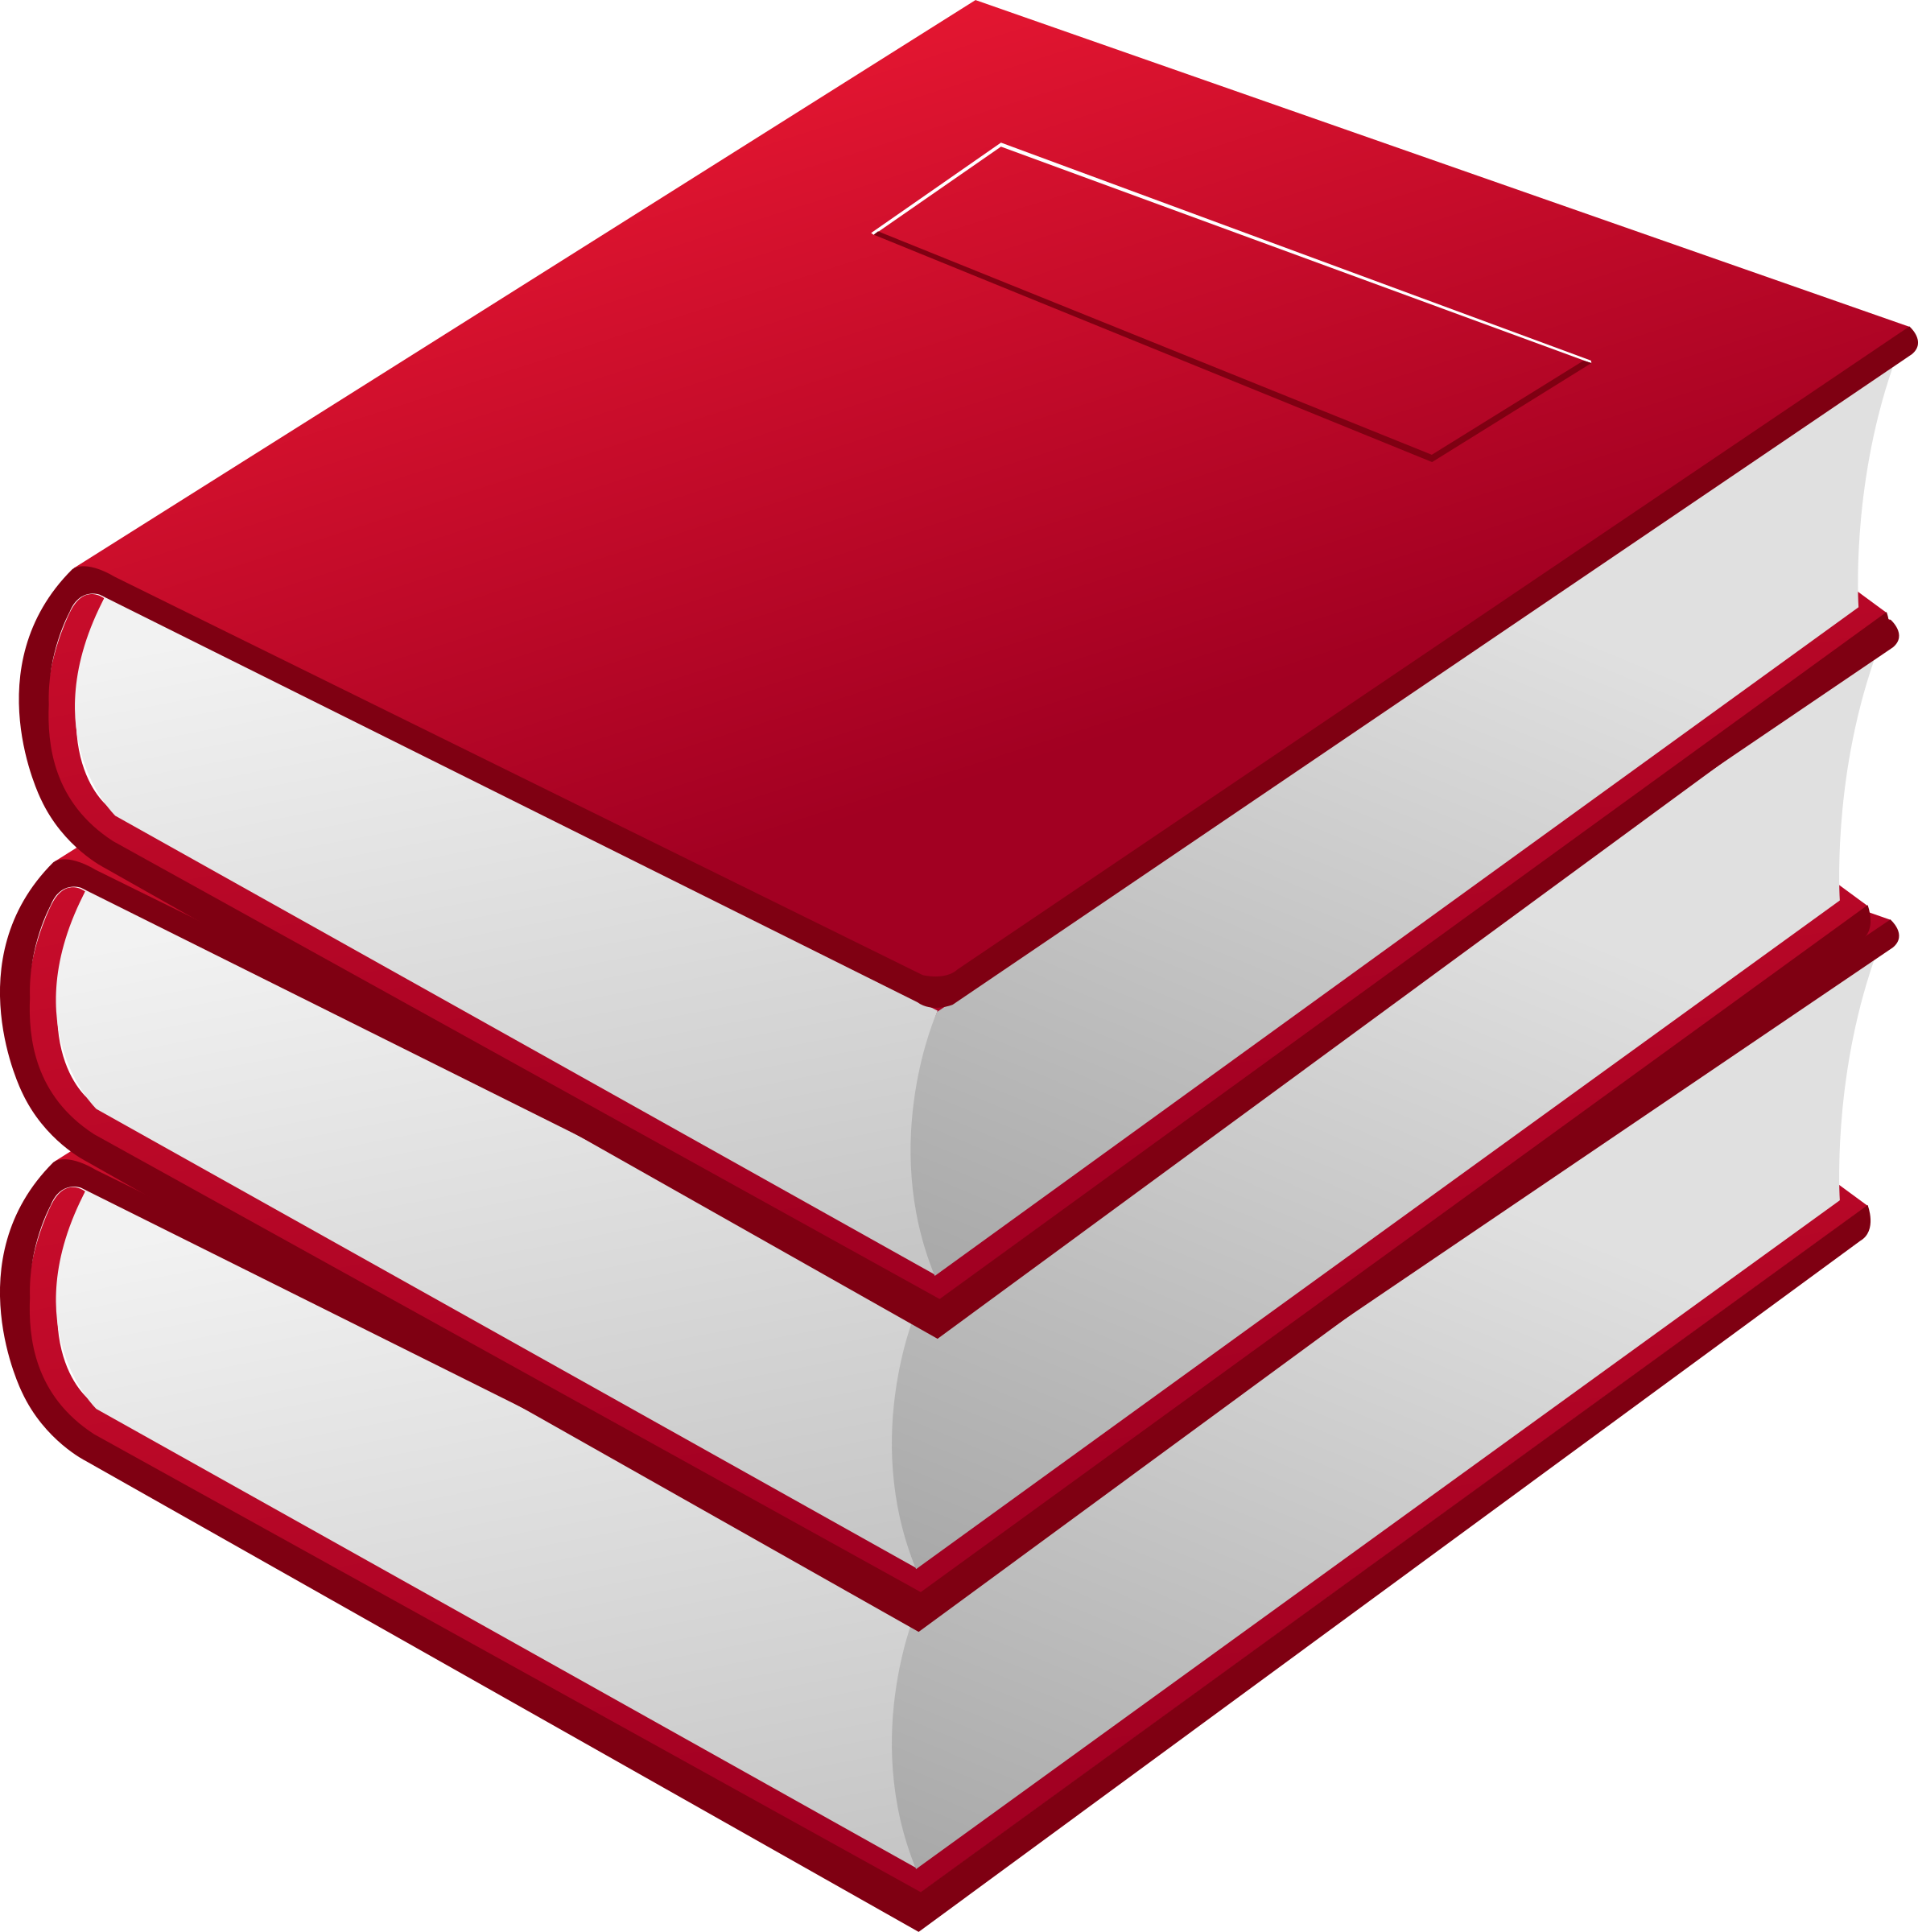 Image of red books in minimalistic style.